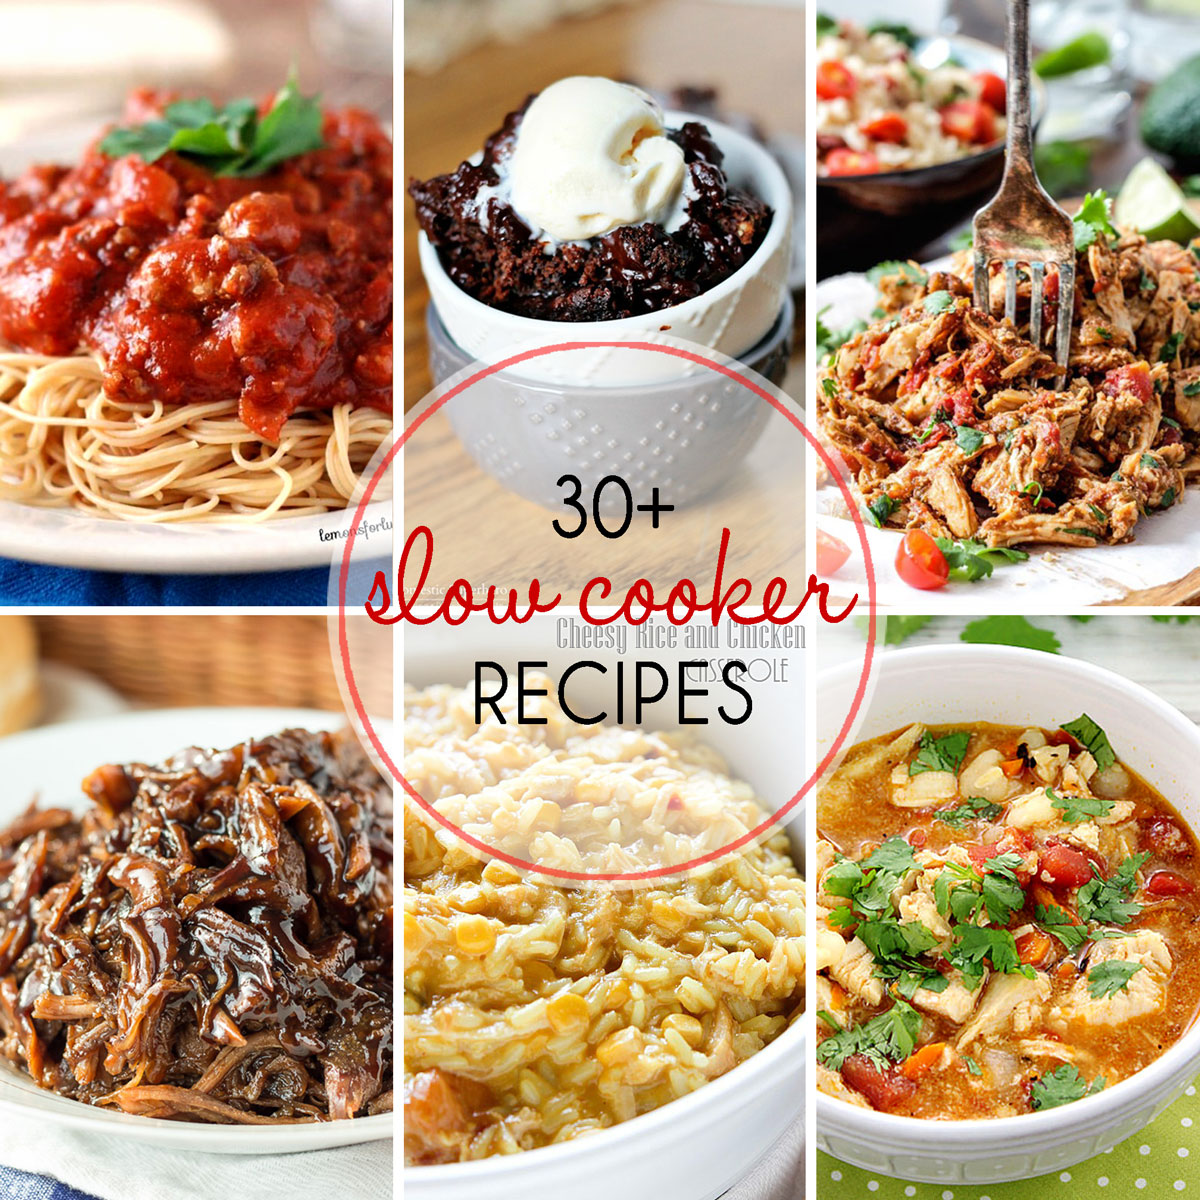 Be sure to save these 30+ slow cooker recipes because you'll want to make them all.